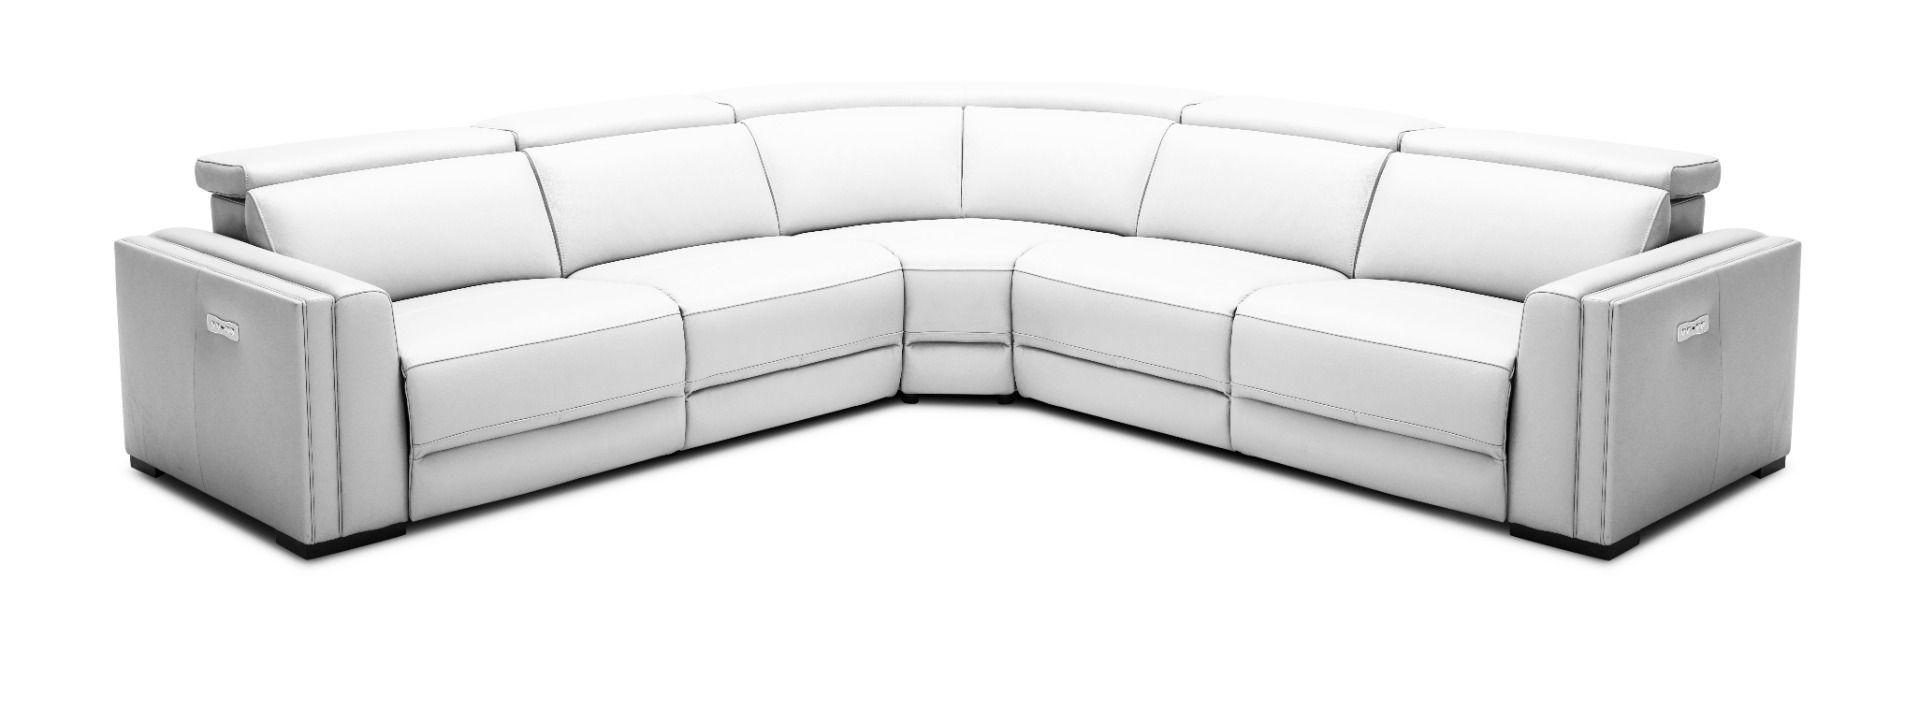 

    
Contemporary White Solid Wood Sectional Sofa With Recliners VIG Furniture Modrest Frazier VGKM-KM268H-W-SECT-SS
